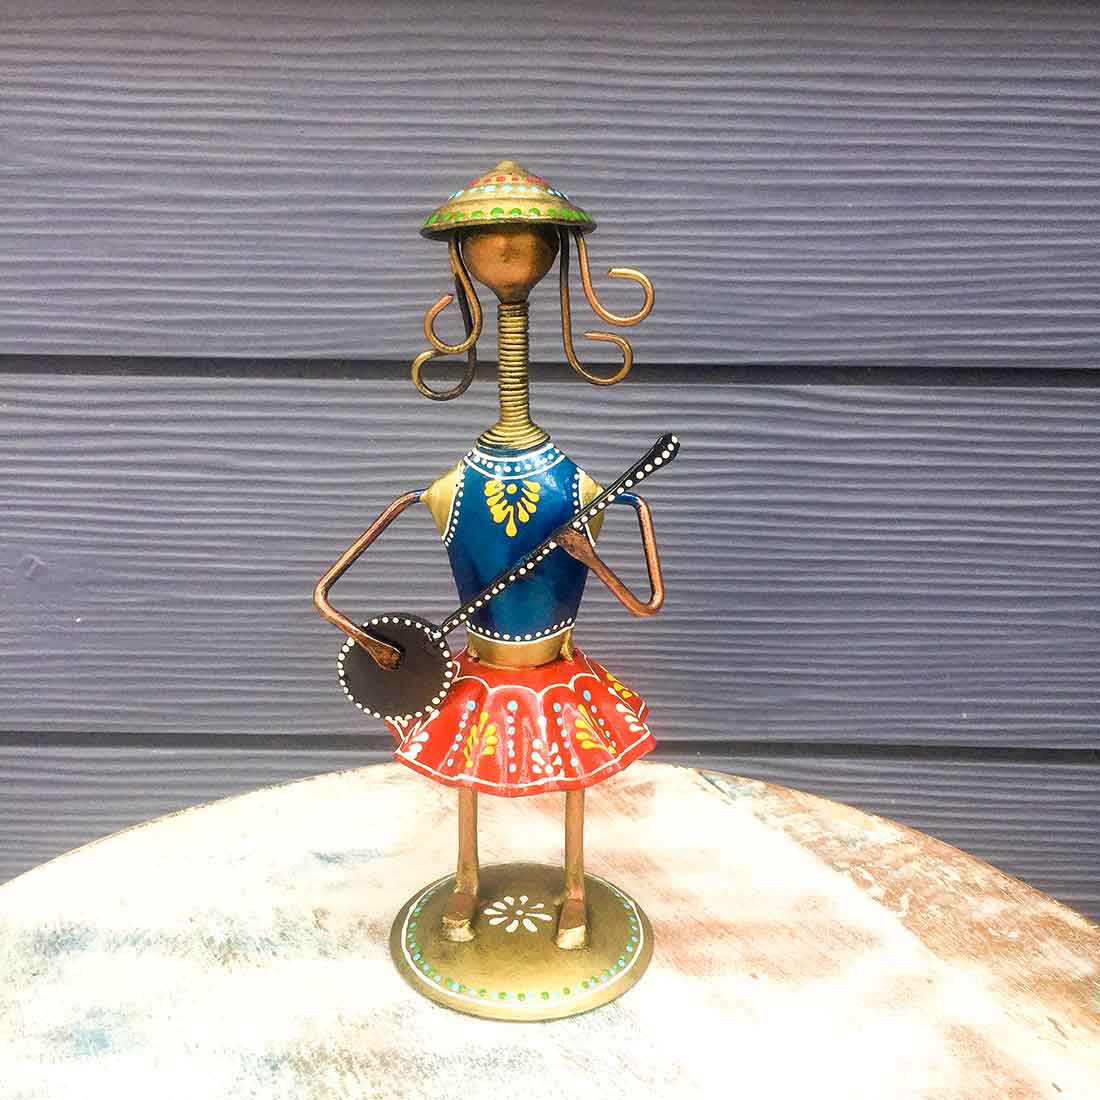 Musician with Sitar - Female Figurines - for Side Table Decoration - 8 Inch - ApkaMart